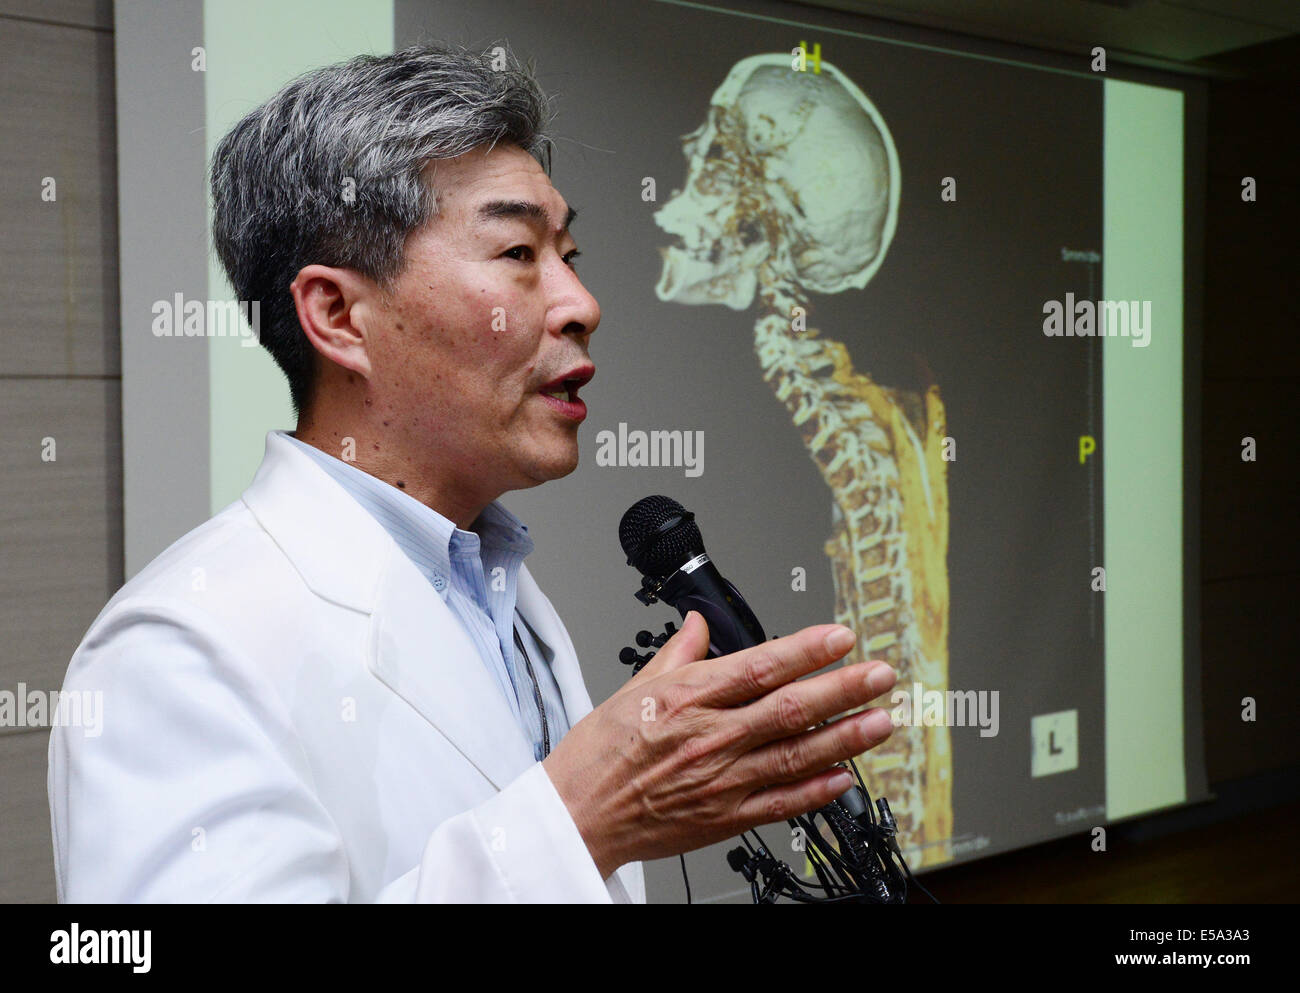 Seoul, South Korea. 25th July, 2014. Lee Han-young, head of Forensic Medicine Department of South Korea's National Forensic Service, speaks during a press conference at the National Forensic Service in Seoul, South Korea, July 25, 2014. The cause of death of South Korea's sunken ferry owner failed to be determined as the body was badly decomposed, the state forensic agency said Friday. Credit:  Park Jin-hee/Xinhua/Alamy Live News Stock Photo